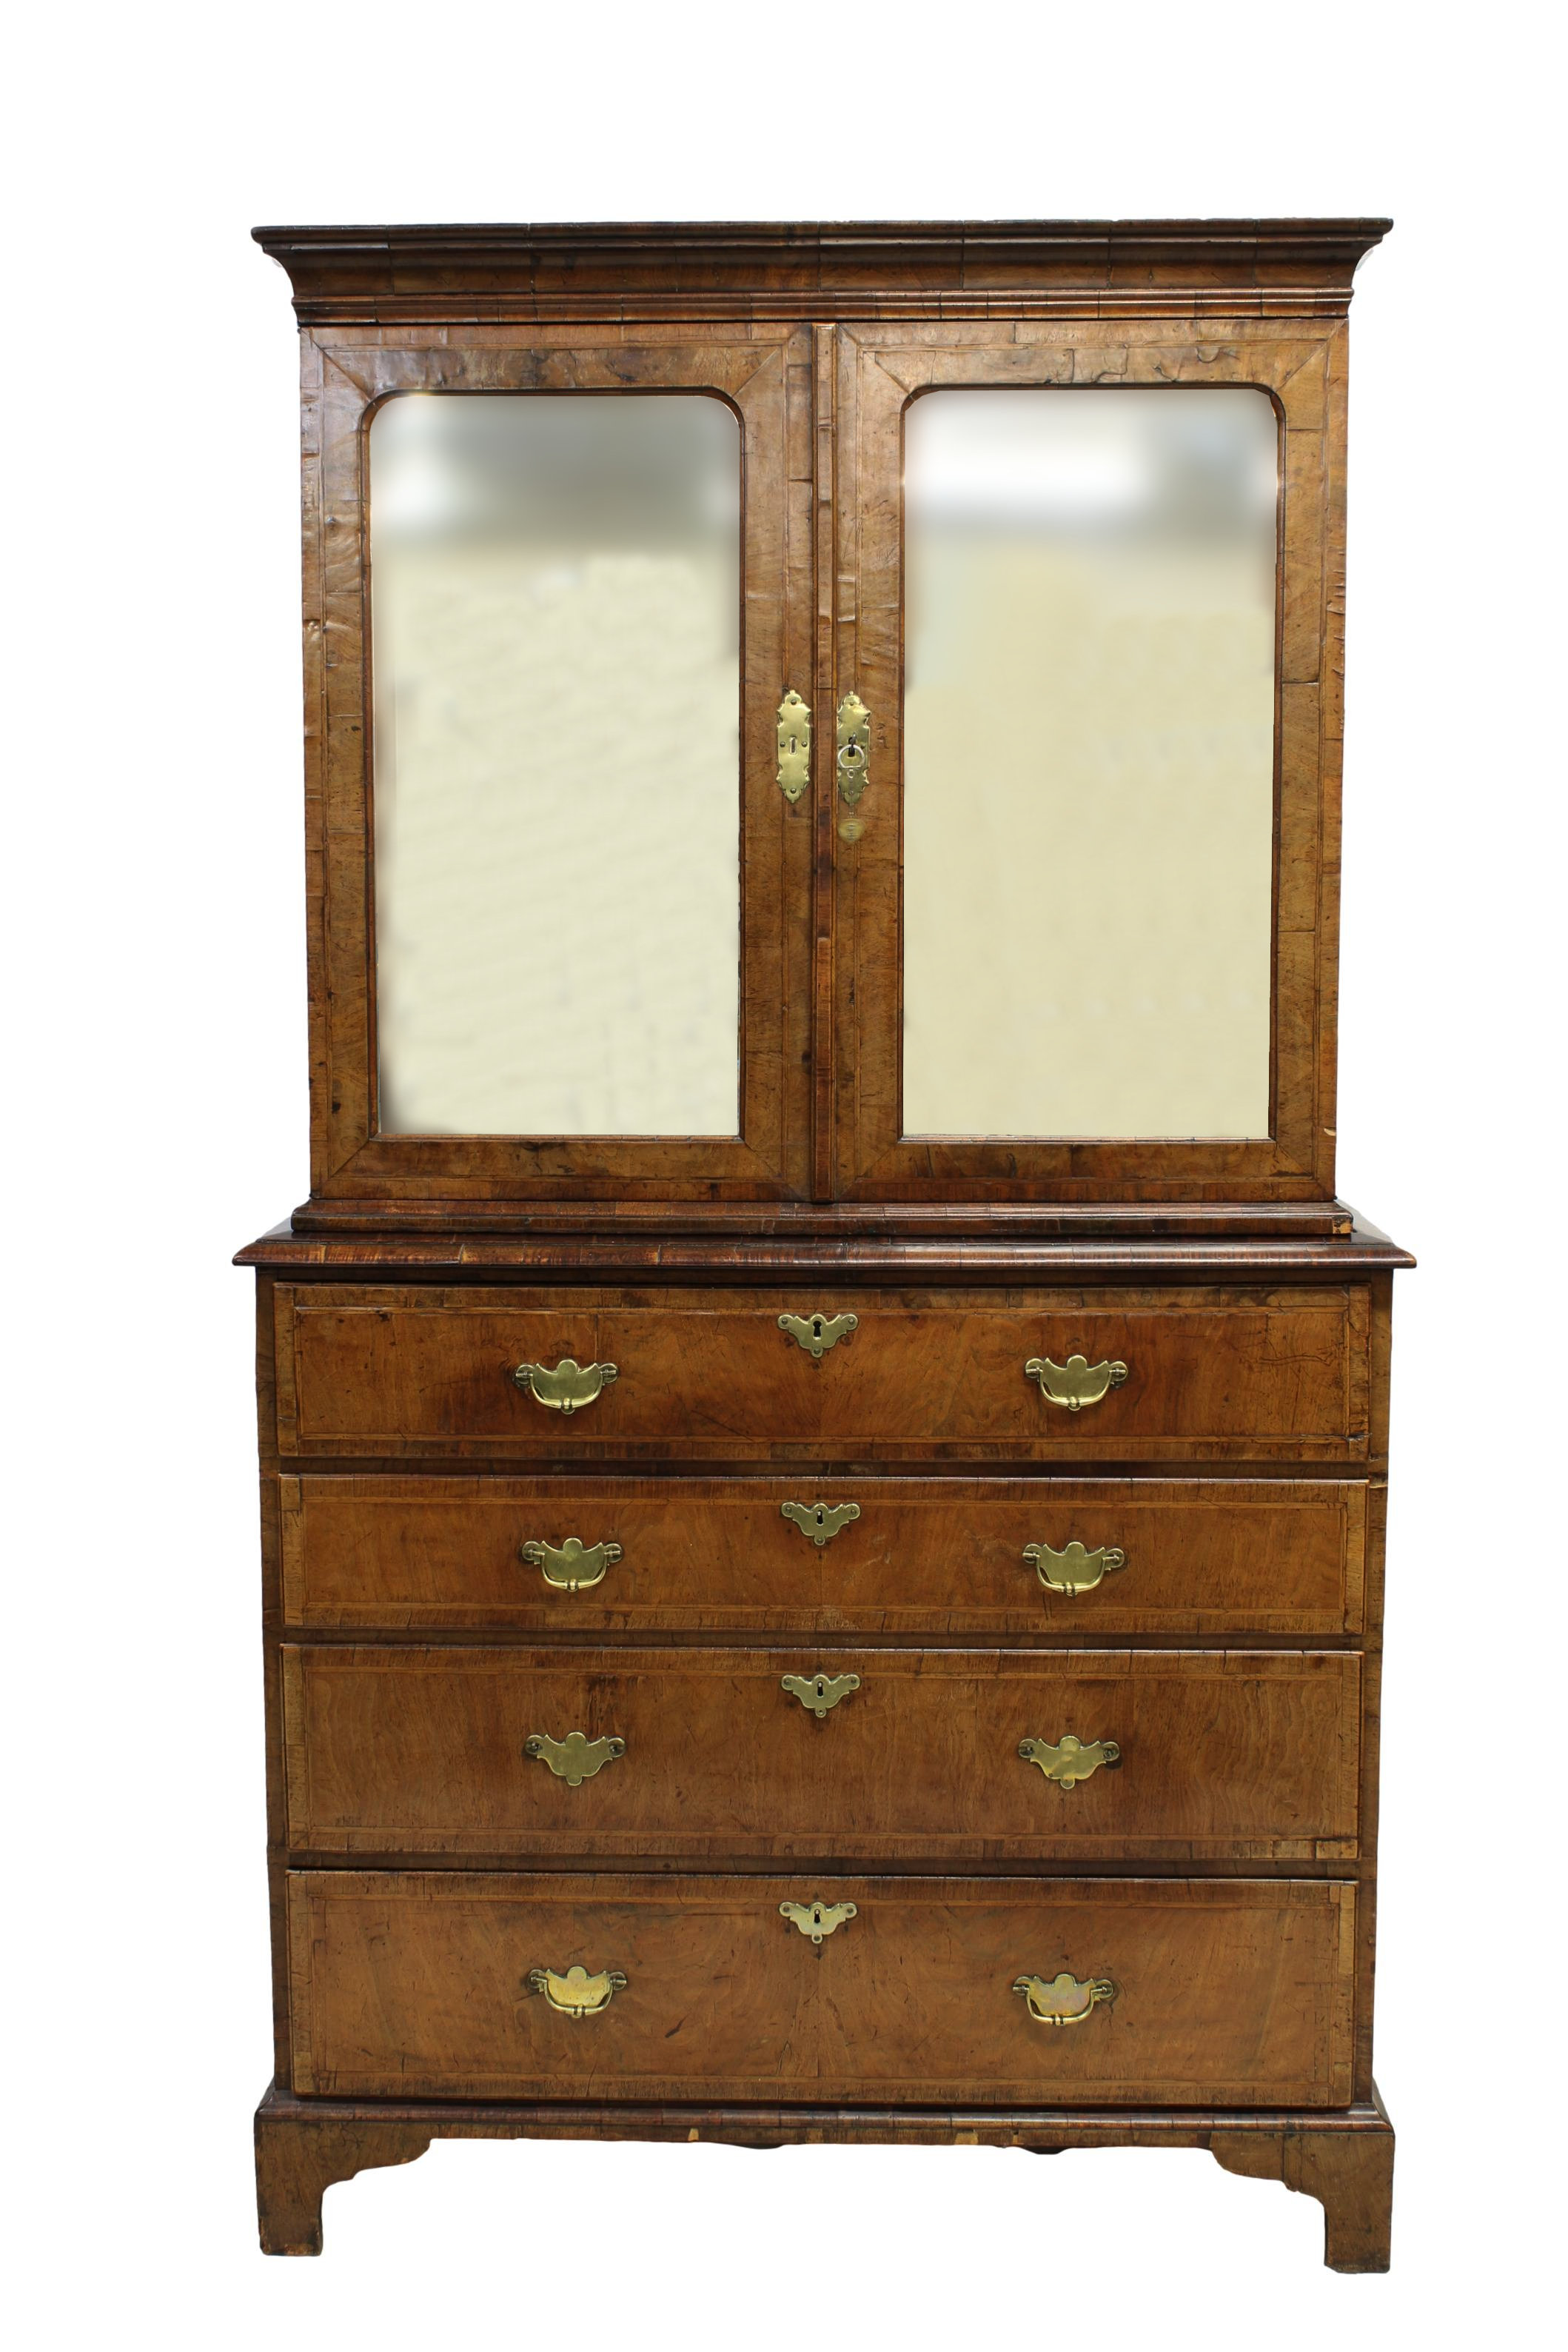 A fine George I walnut secretaire cabinet on chest, upper section with laburnum interior